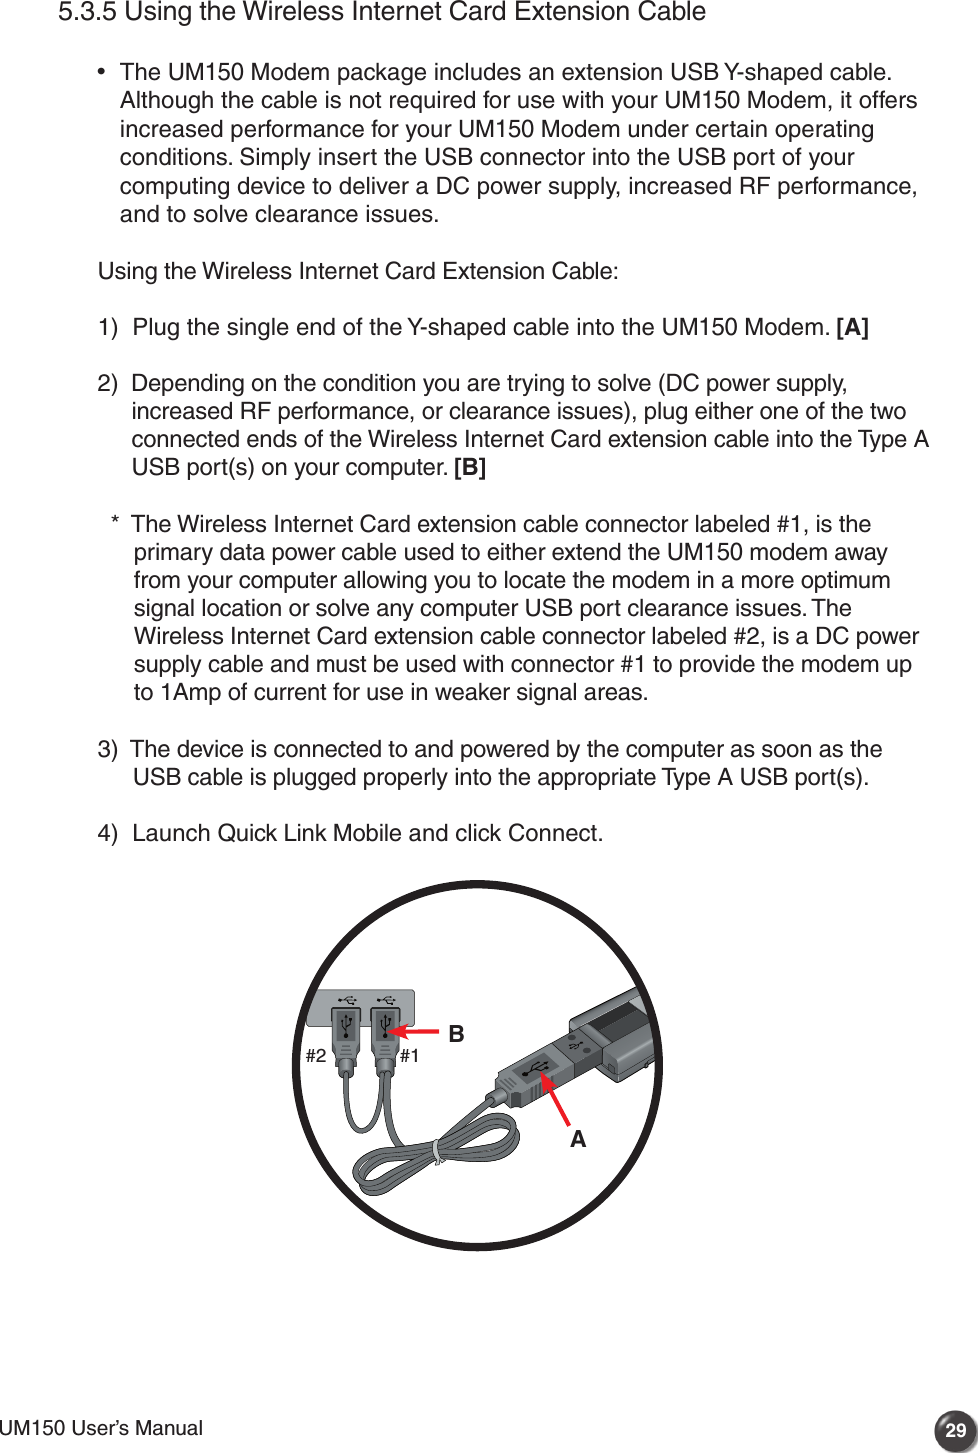 UM150 User’s Manual 29UM150 User’s Manual5.3.5 Using the Wireless Internet Card Extension Cable •   The UM150 Modem package includes an extension USB Y-shaped cable. Although the cable is not required for use with your UM150 Modem, it offers increased performance for your UM150 Modem under certain operating conditions. Simply insert the USB connector into the USB port of your computing device to deliver a DC power supply, increased RF performance, and to solve clearance issues. Using the Wireless Internet Card Extension Cable:  1)   Plug the single end of the Y-shaped cable into the UM150 Modem. [A]  2)   Depending on the condition you are trying to solve (DC power supply, increased RF performance, or clearance issues), plug either one of the two connected ends of the Wireless Internet Card extension cable into the Type A USB port(s) on your computer. [B]    *   The Wireless Internet Card extension cable connector labeled #1, is the primary data power cable used to either extend the UM150 modem away from your computer allowing you to locate the modem in a more optimum signal location or solve any computer USB port clearance issues. The Wireless Internet Card extension cable connector labeled #2, is a DC power supply cable and must be used with connector #1 to provide the modem up to 1Amp of current for use in weaker signal areas.  3)   The device is connected to and powered by the computer as soon as the USB cable is plugged properly into the appropriate Type A USB port(s).  4)   Launch Quick Link Mobile and click Connect.AB#1#2